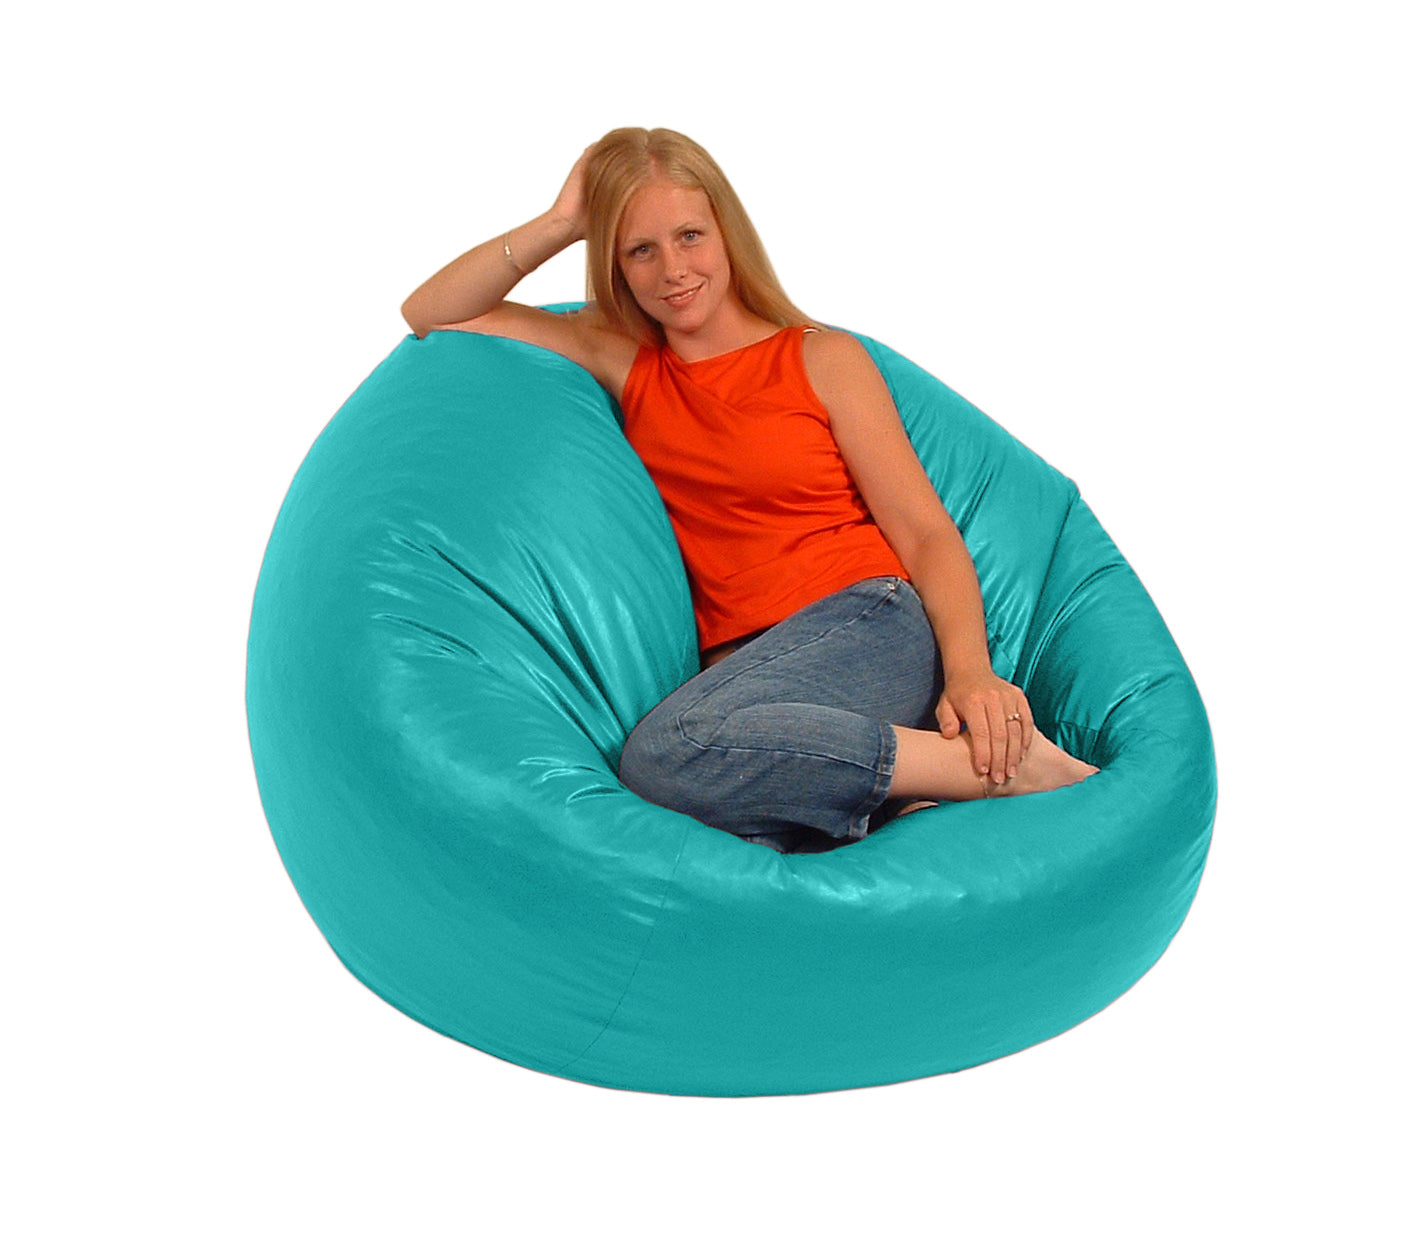 poor Omit Screech Vinyl Bean Bag Chair - ComfyBean Adult size lounger classic style – Bean  Products